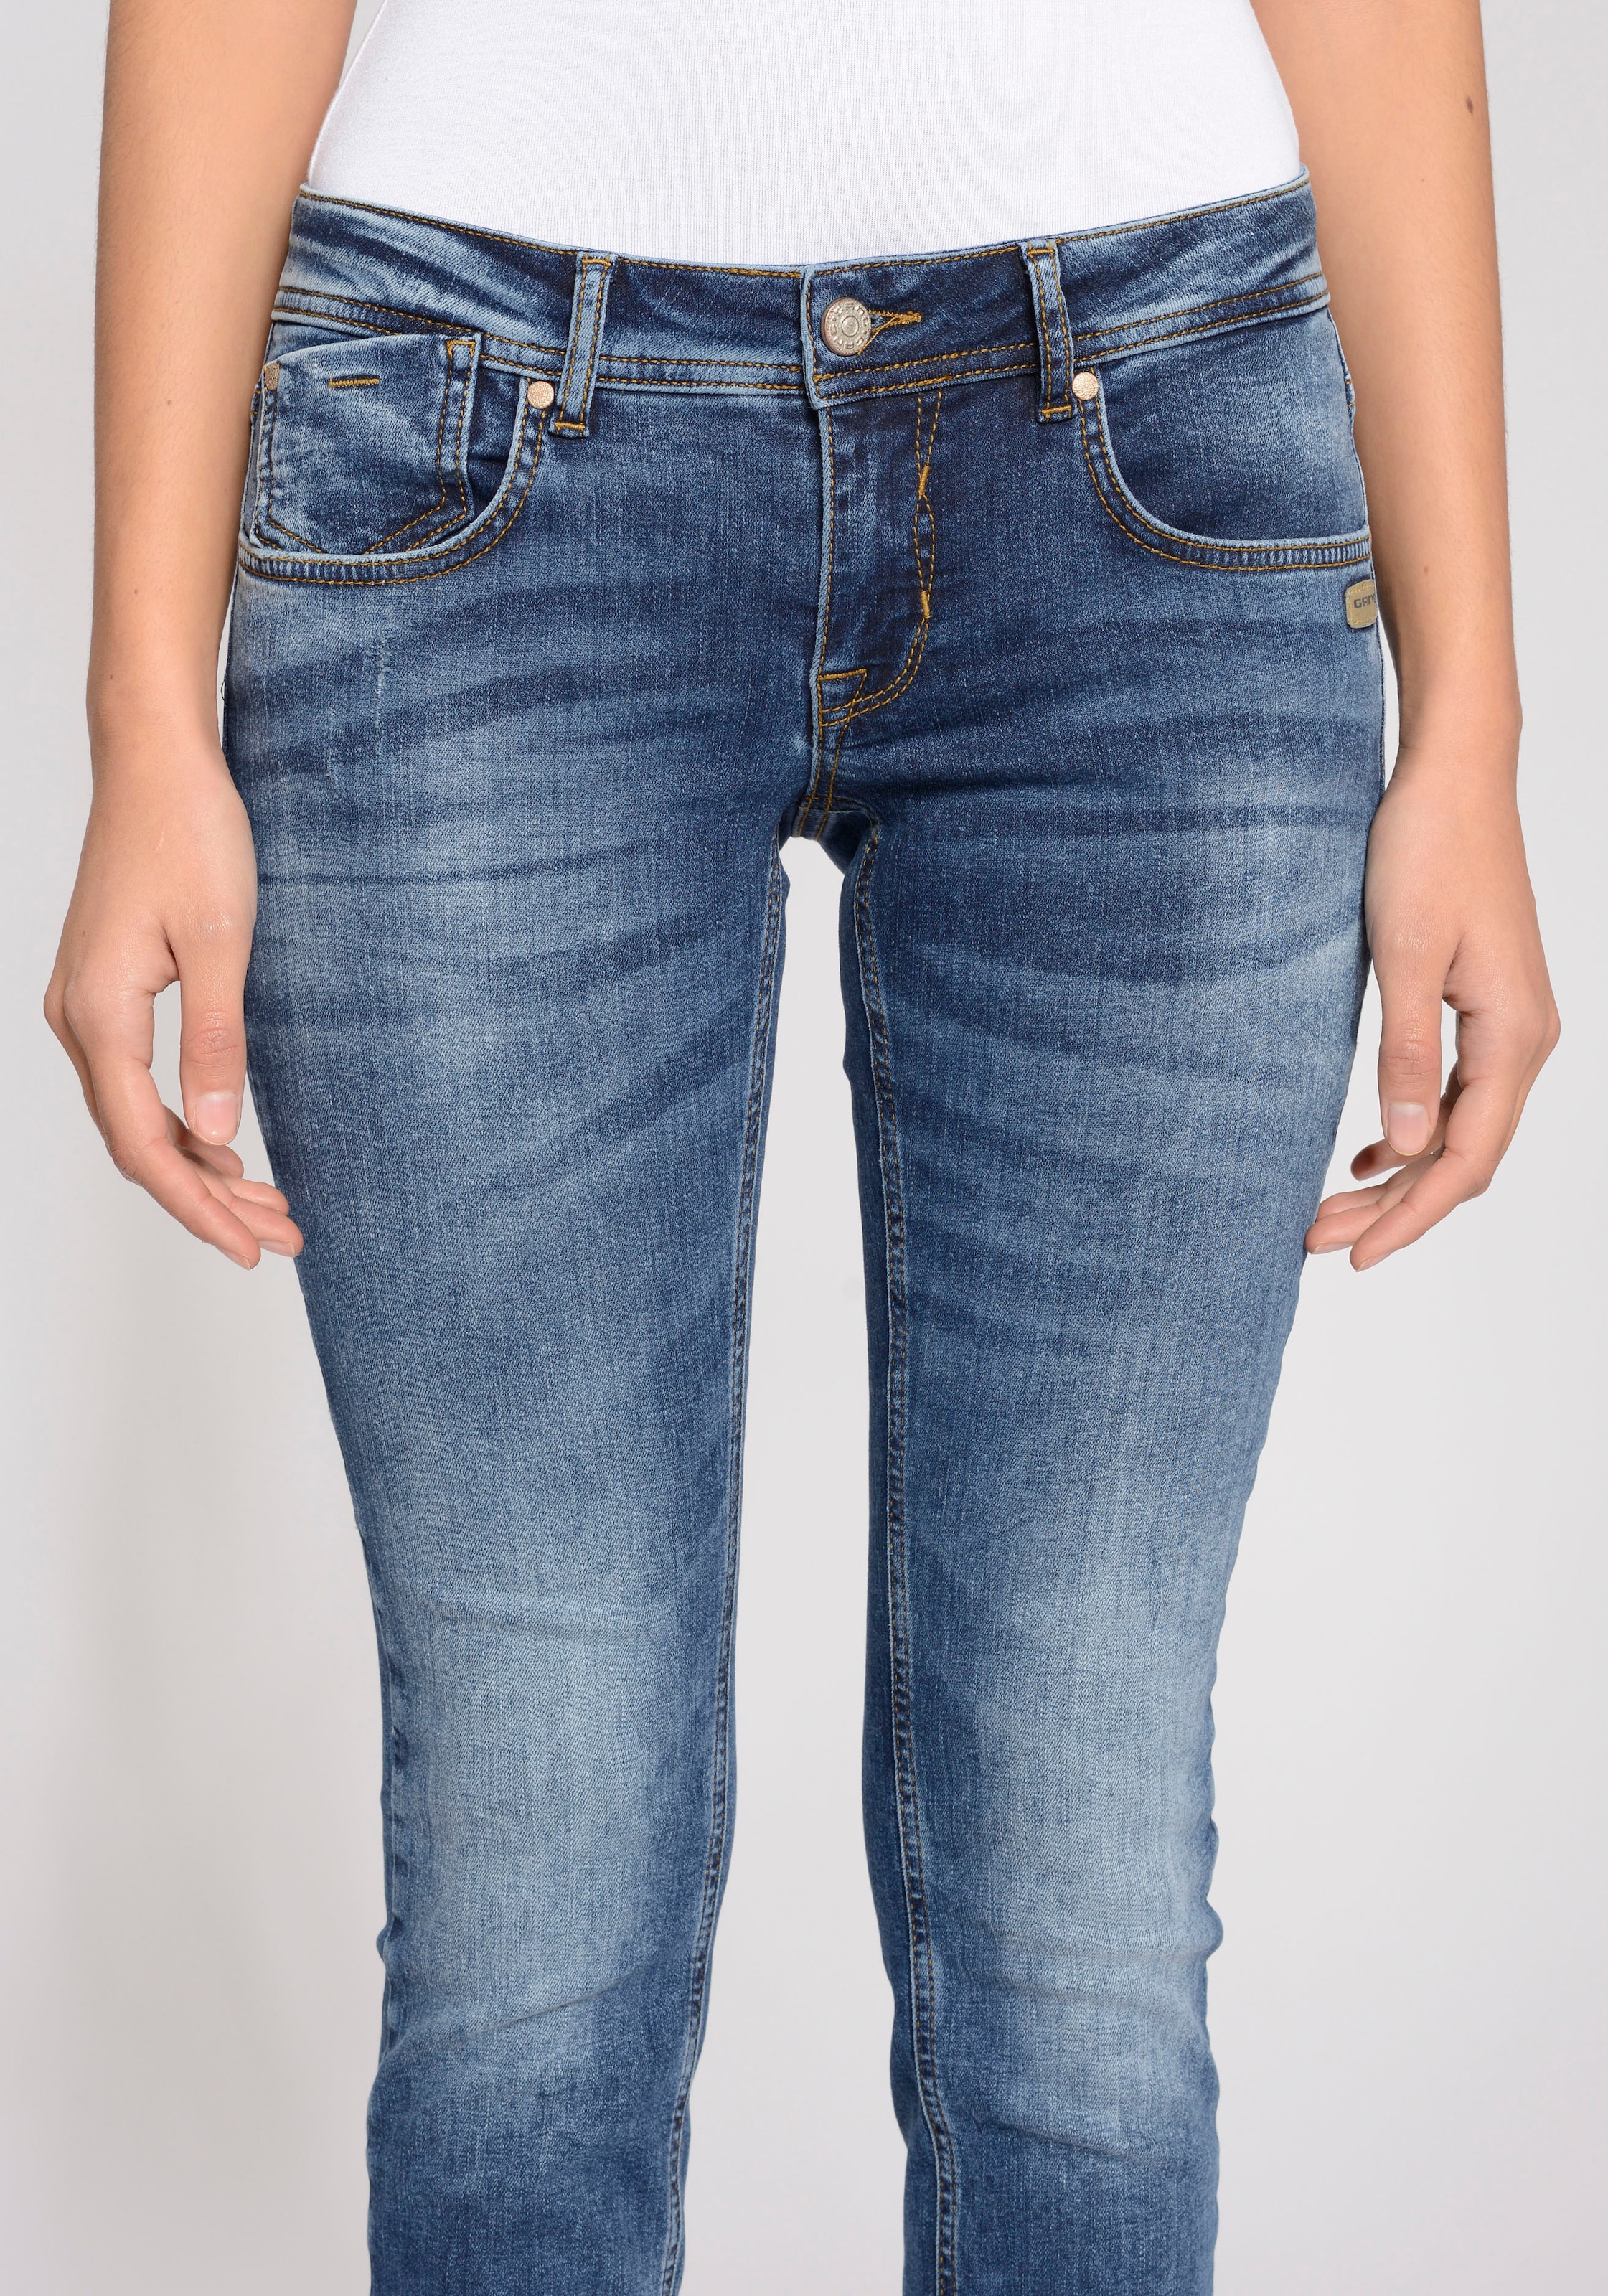 Faye »94 ♕ Cropped« Skinny-fit-Jeans GANG bei